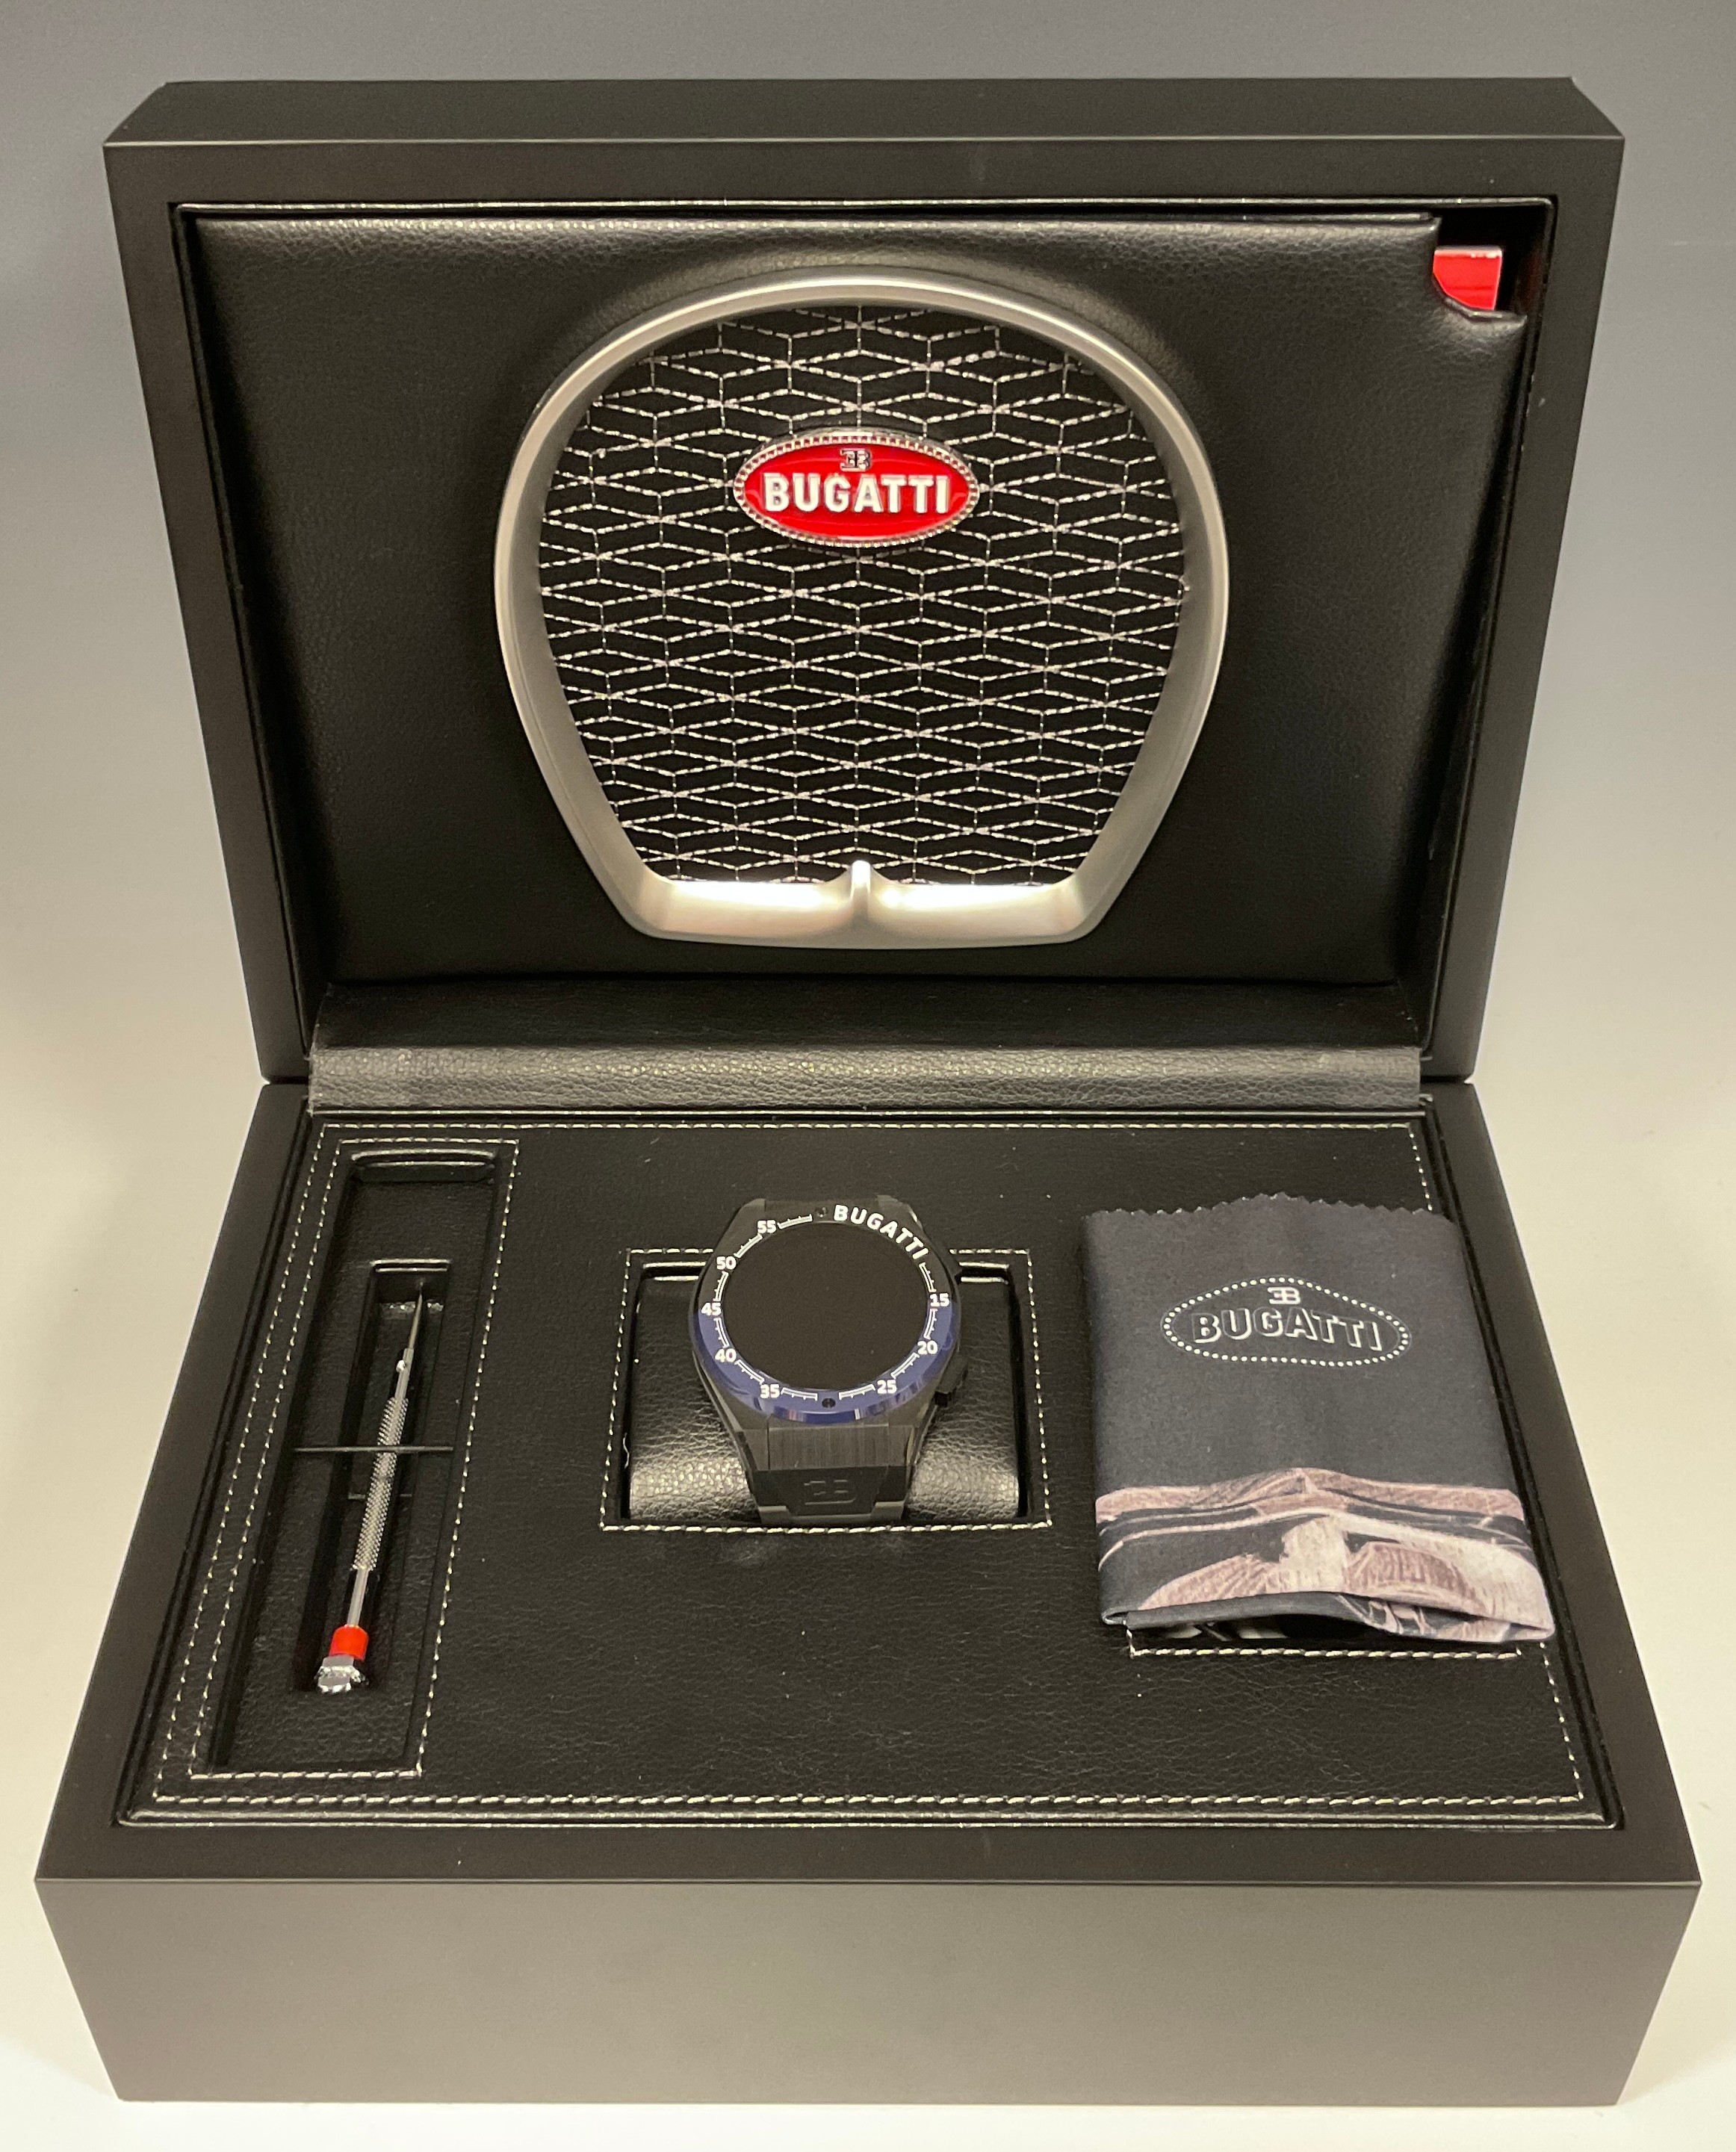 A Bugatti Ceramique edition one smartwatch, three interchangeable bezels, metal and rubber straps, - Image 2 of 2